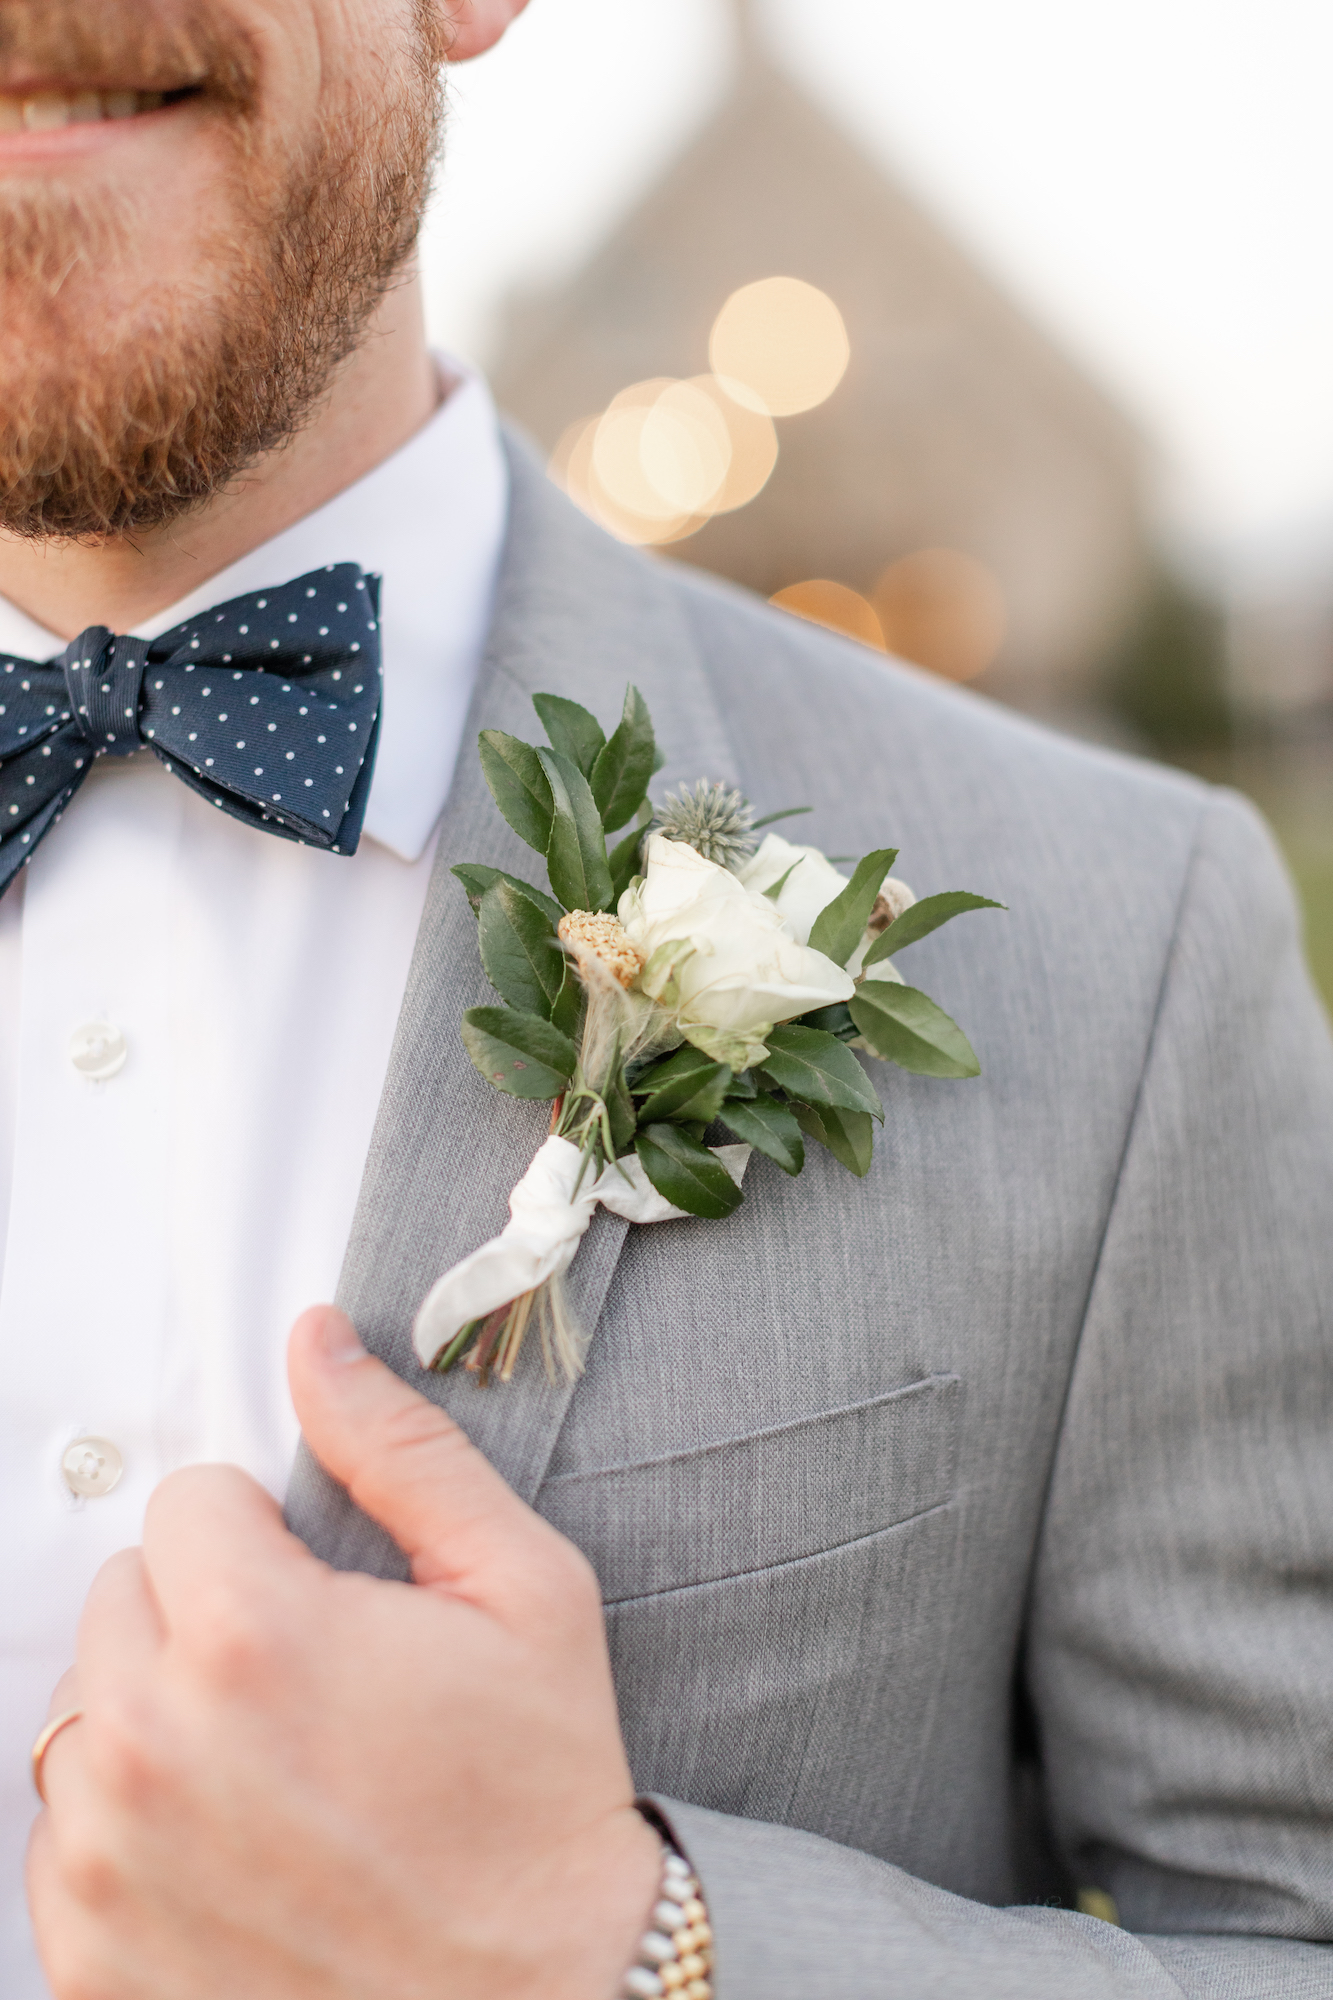 Gray wedding suit with polka dot bow tie